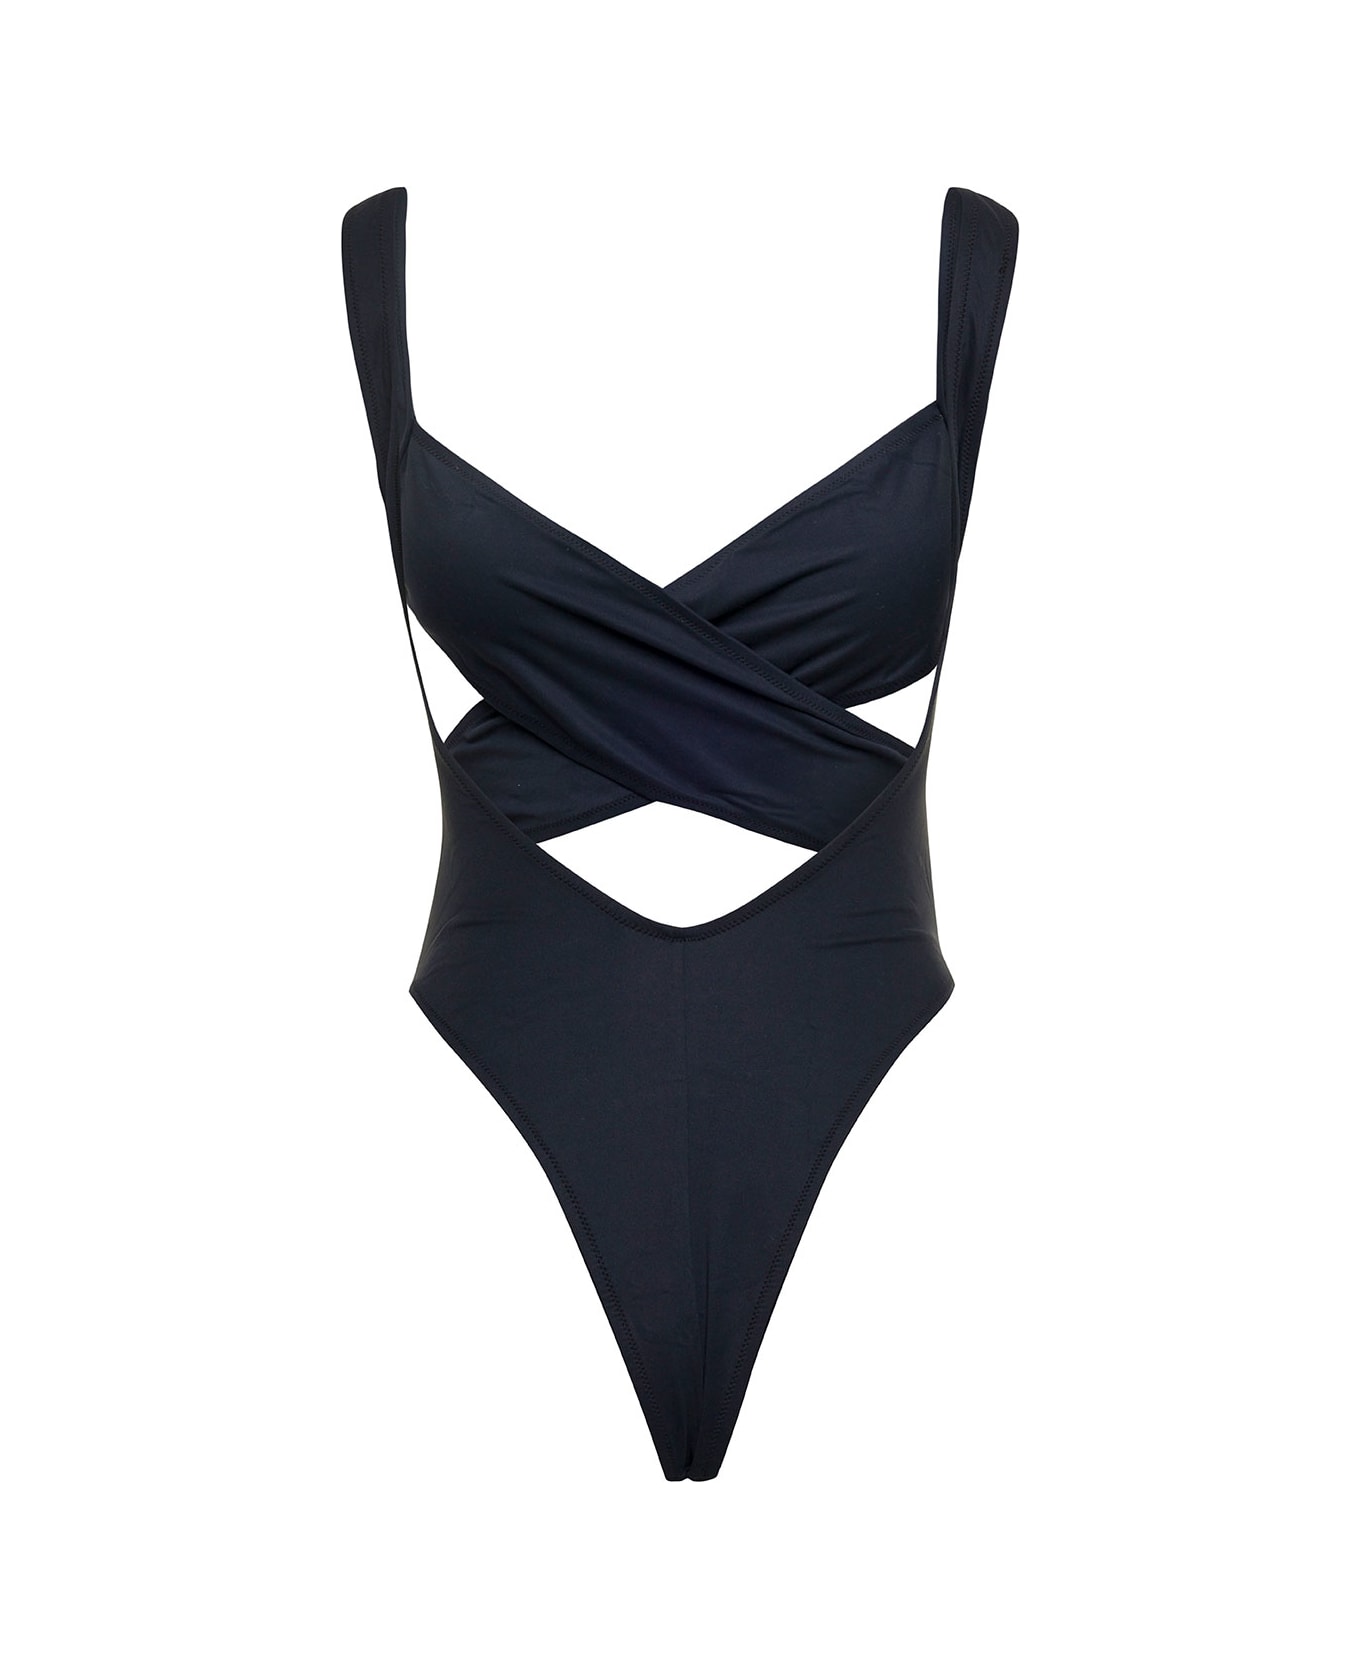 Reina Olga 'exotica' Black One-piece Swimsuit With Cut-out And Cross-strap In Polyamide Stretch Woman - Black